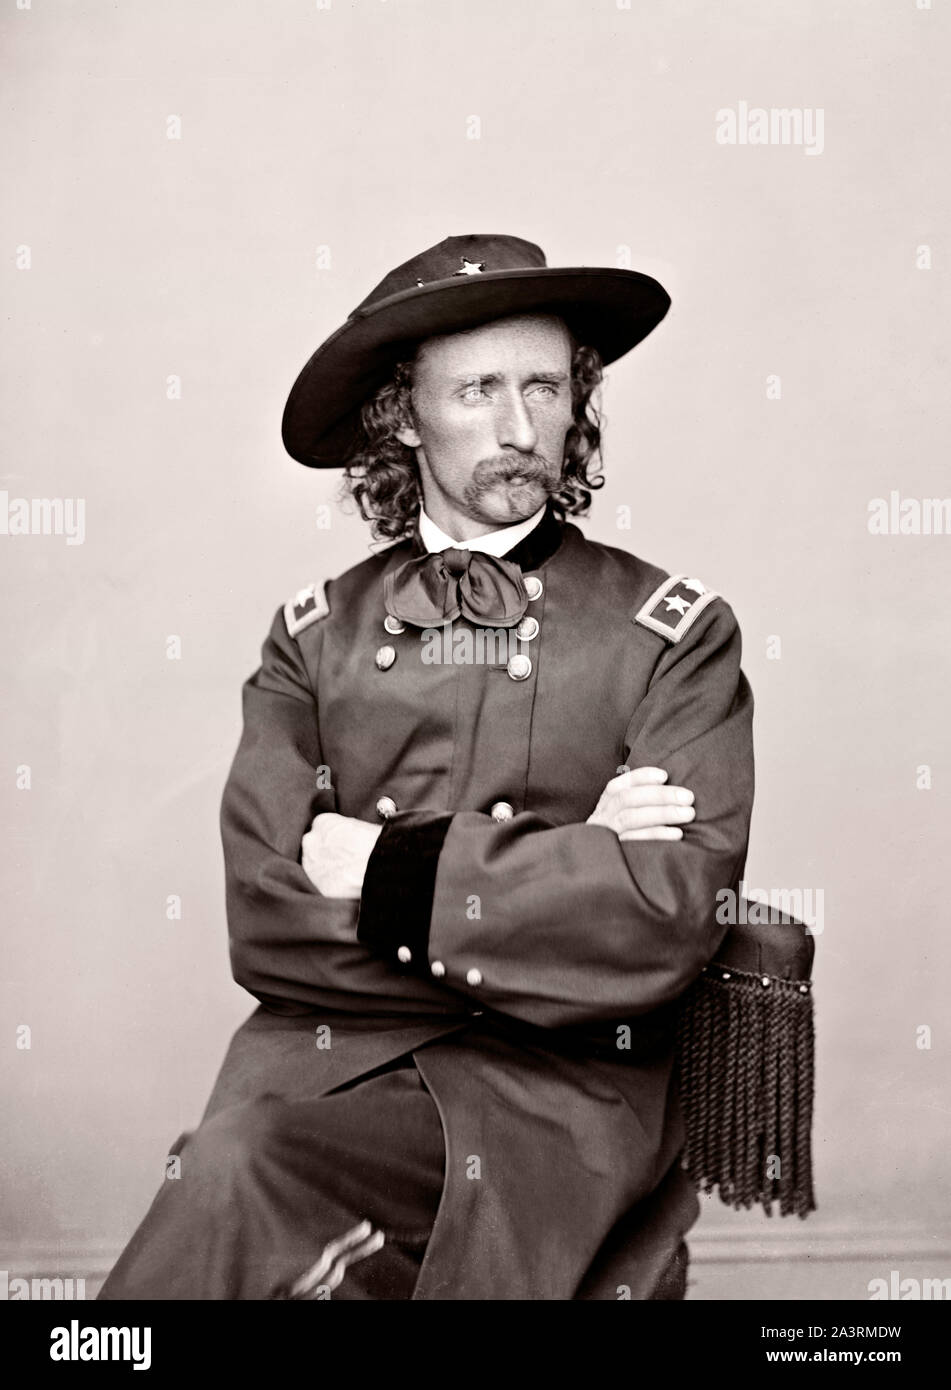 George Armstrong Custer (1839 – 1876) was a United States Army officer and cavalry commander in the American Civil War and the American Indian Wars. Stock Photo